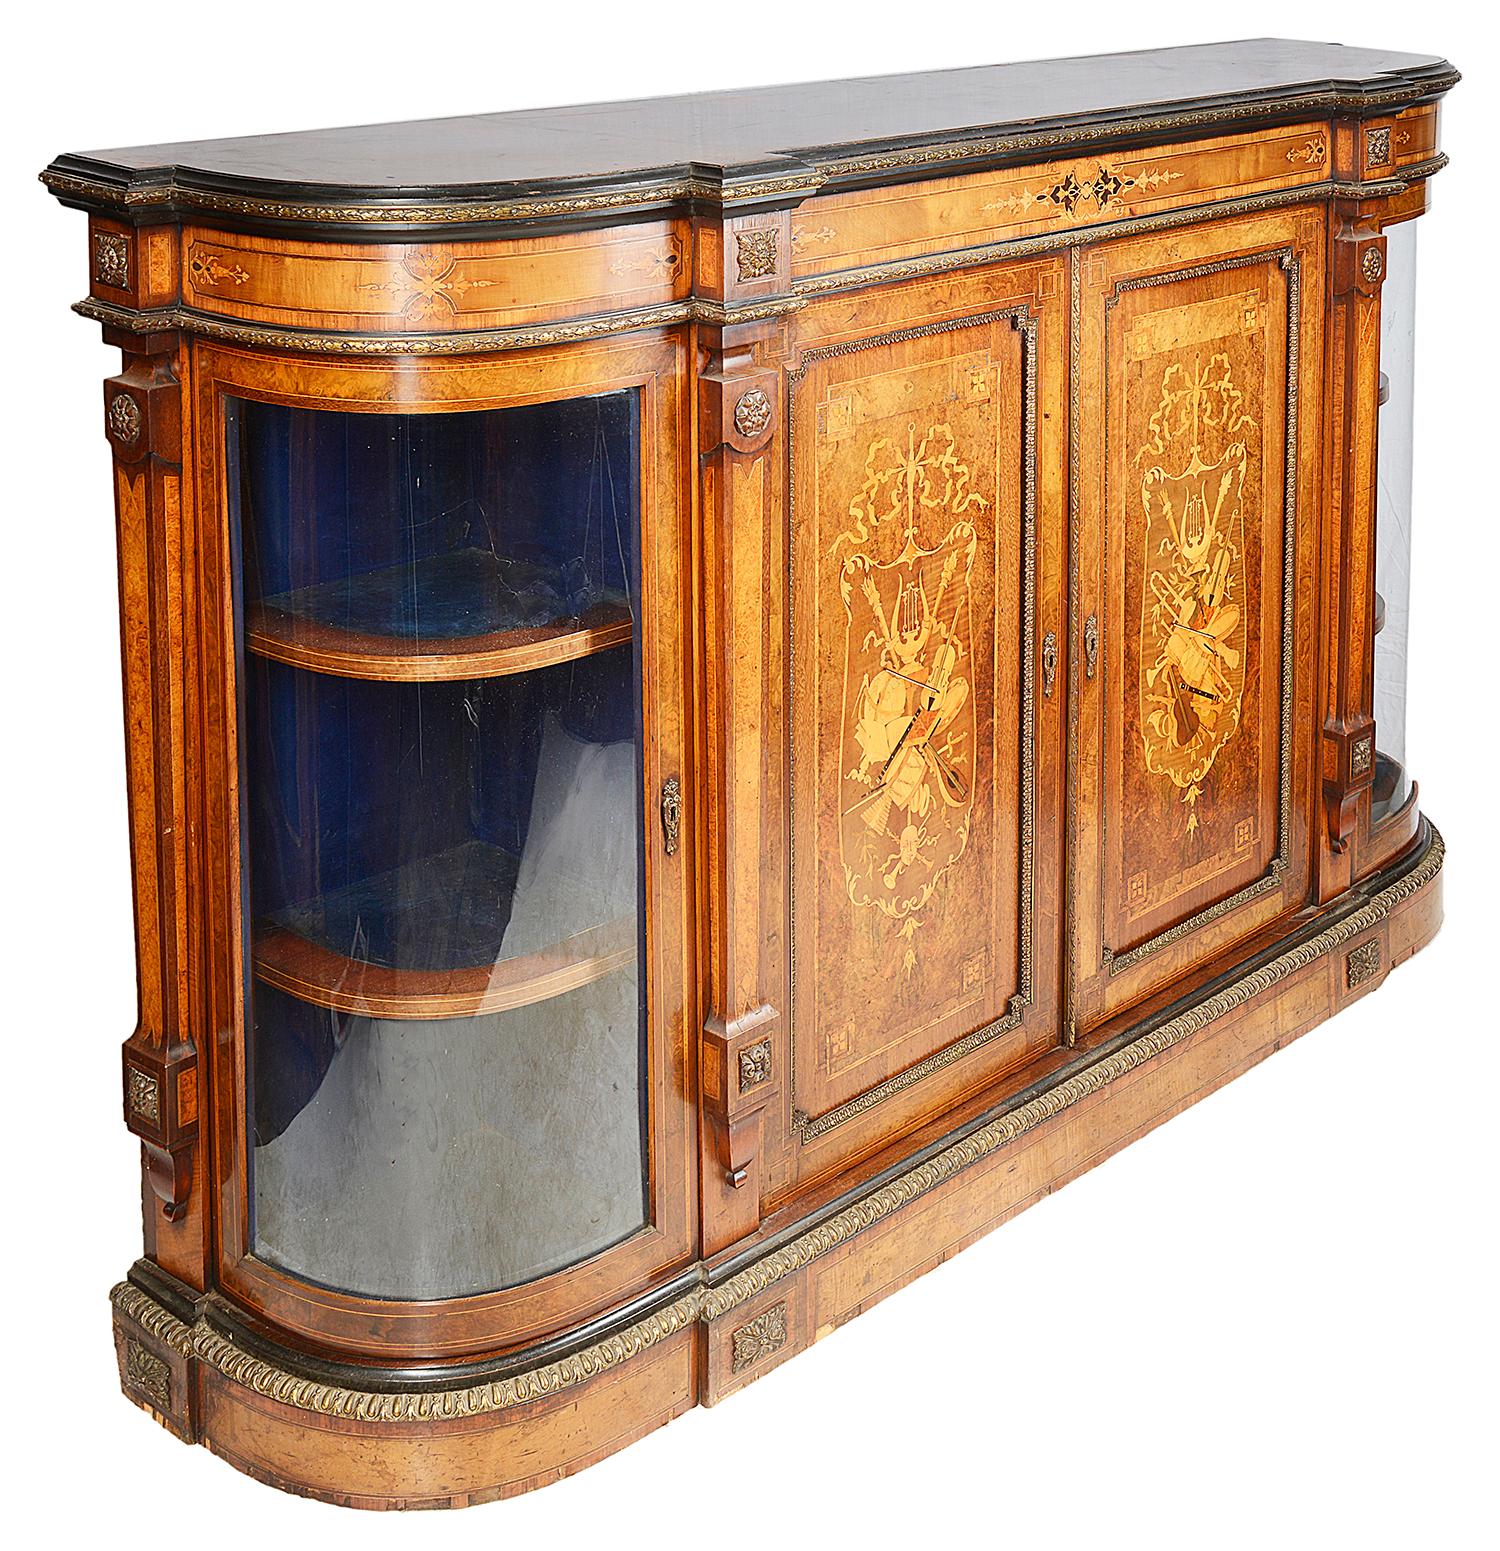 A very good quality Victorian period Walnut credenza, having bow glass to either side with shelves within. The two central doors each with wonderful marquetry inlay, depicting musical instruments and raised on a plinth base.